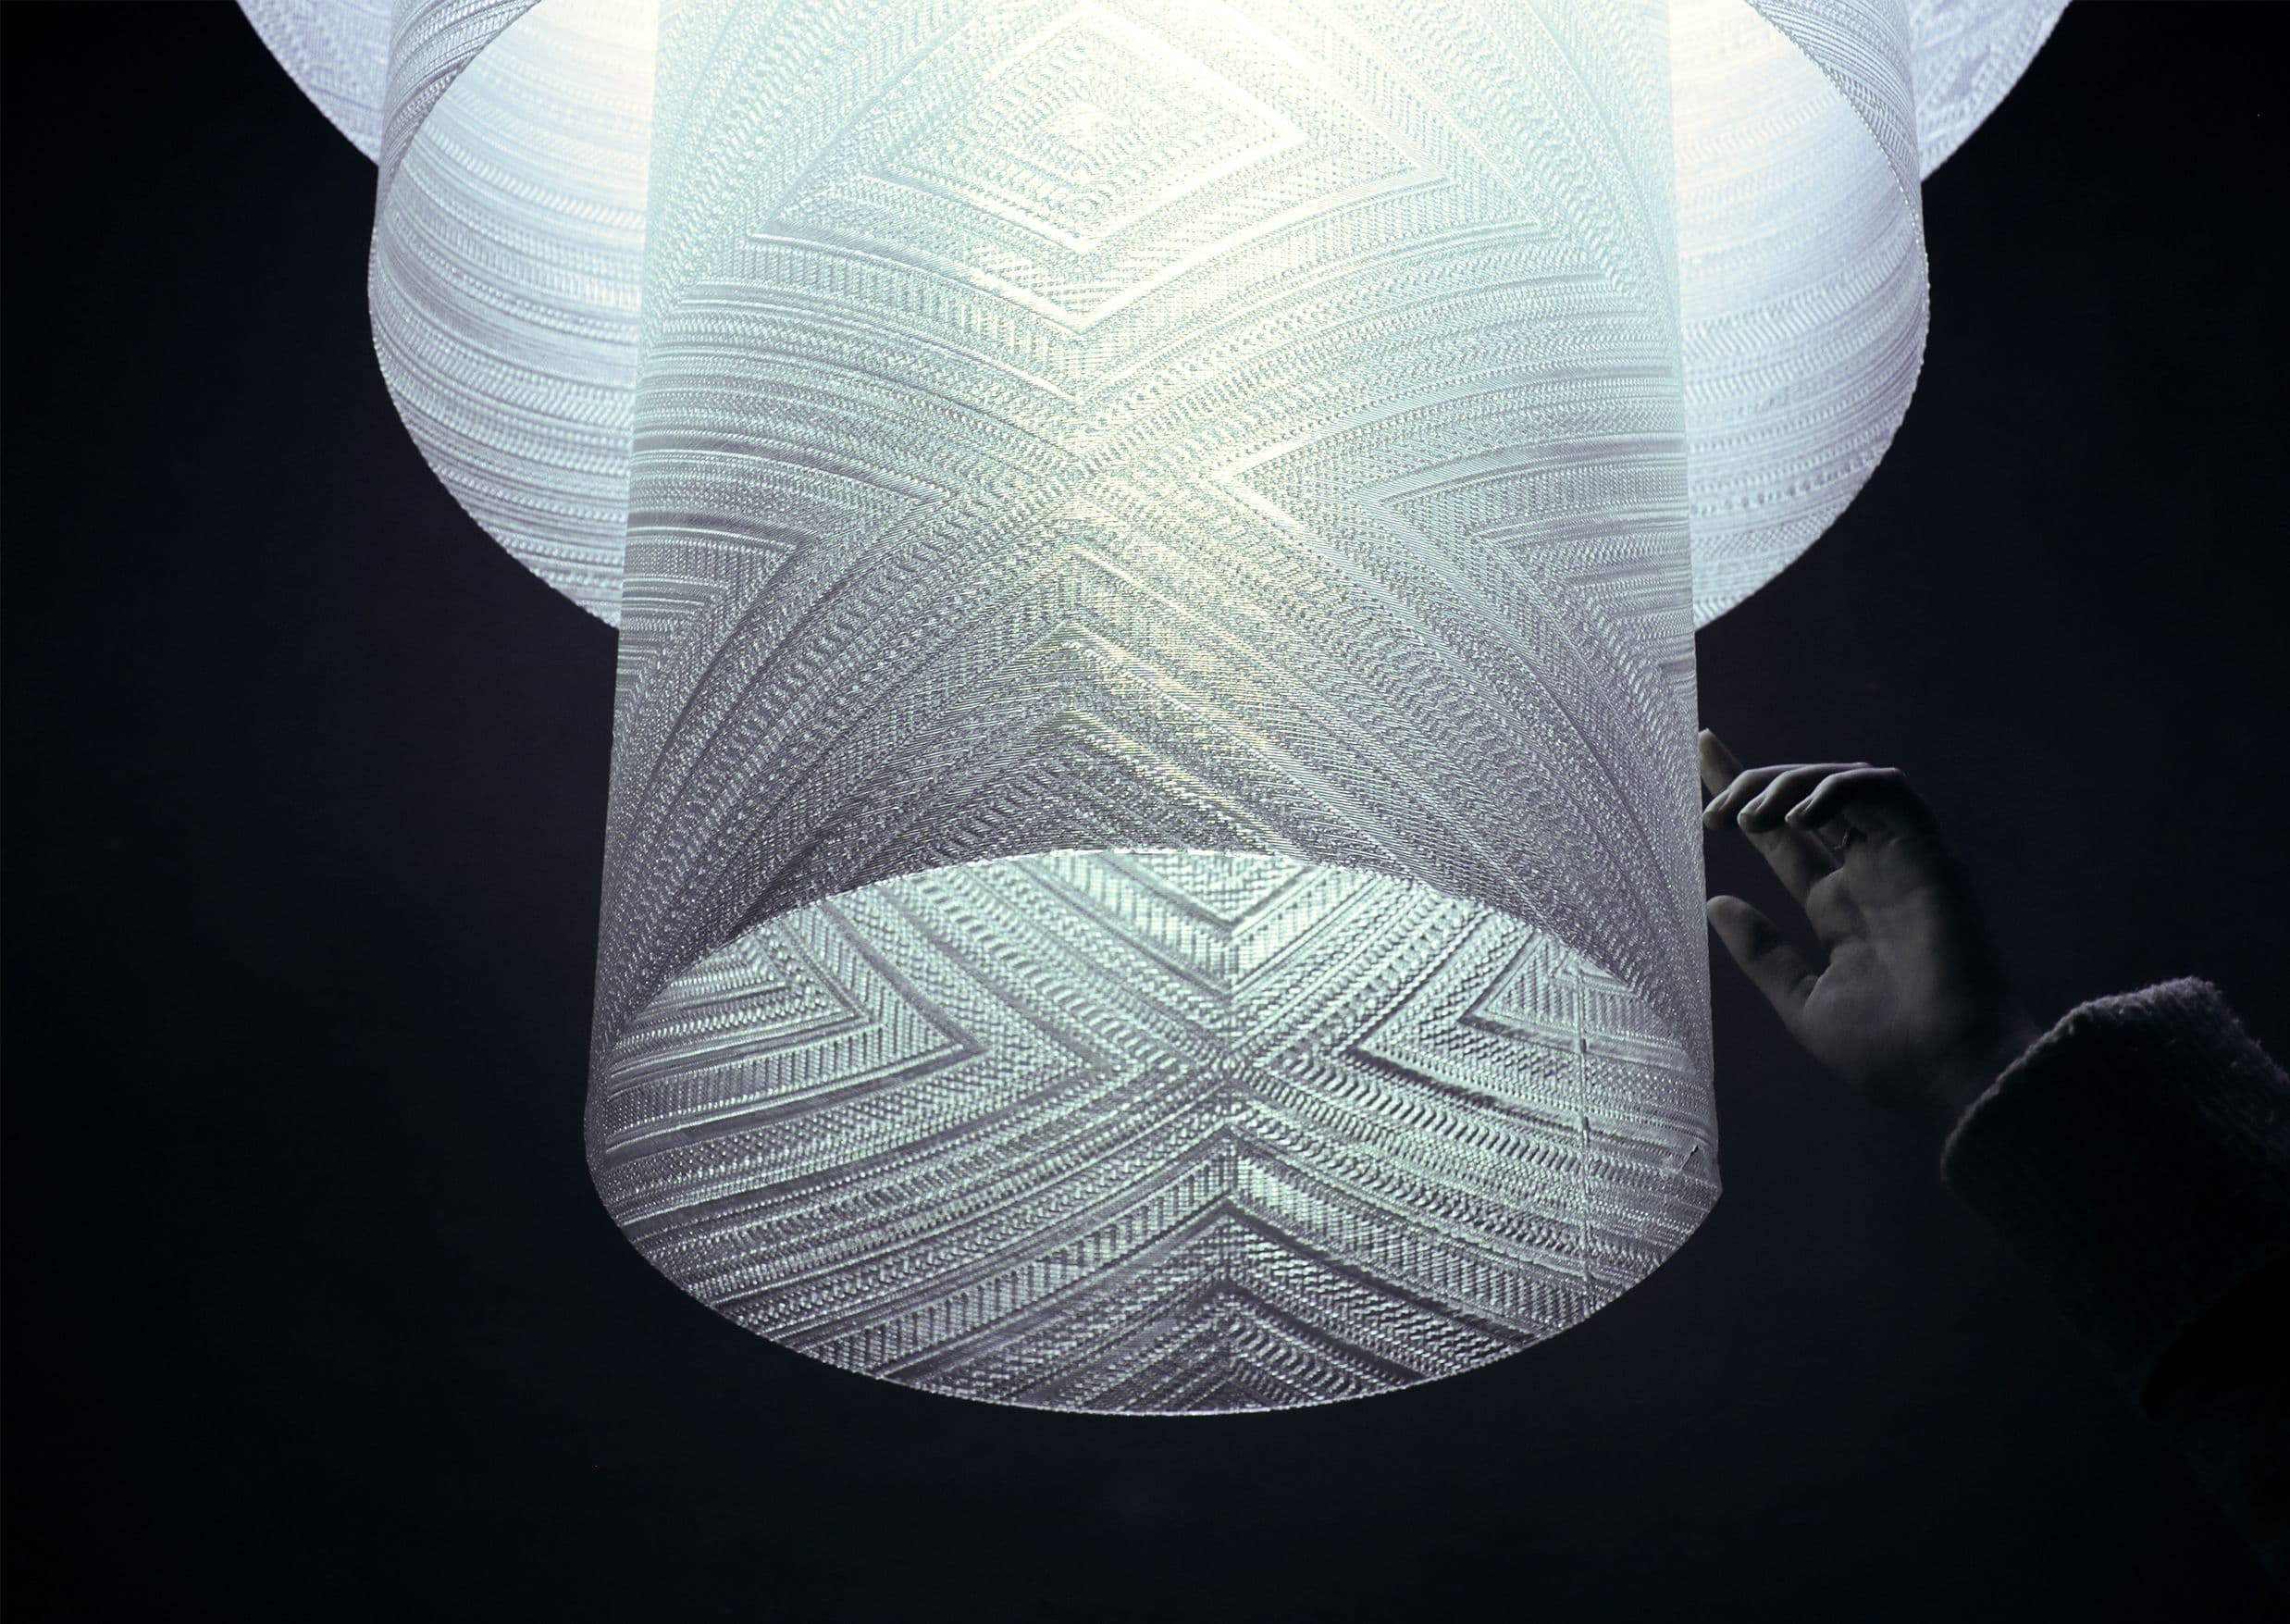 image of a textured light shade with a black background, a hand is reaching up to touch the light shade